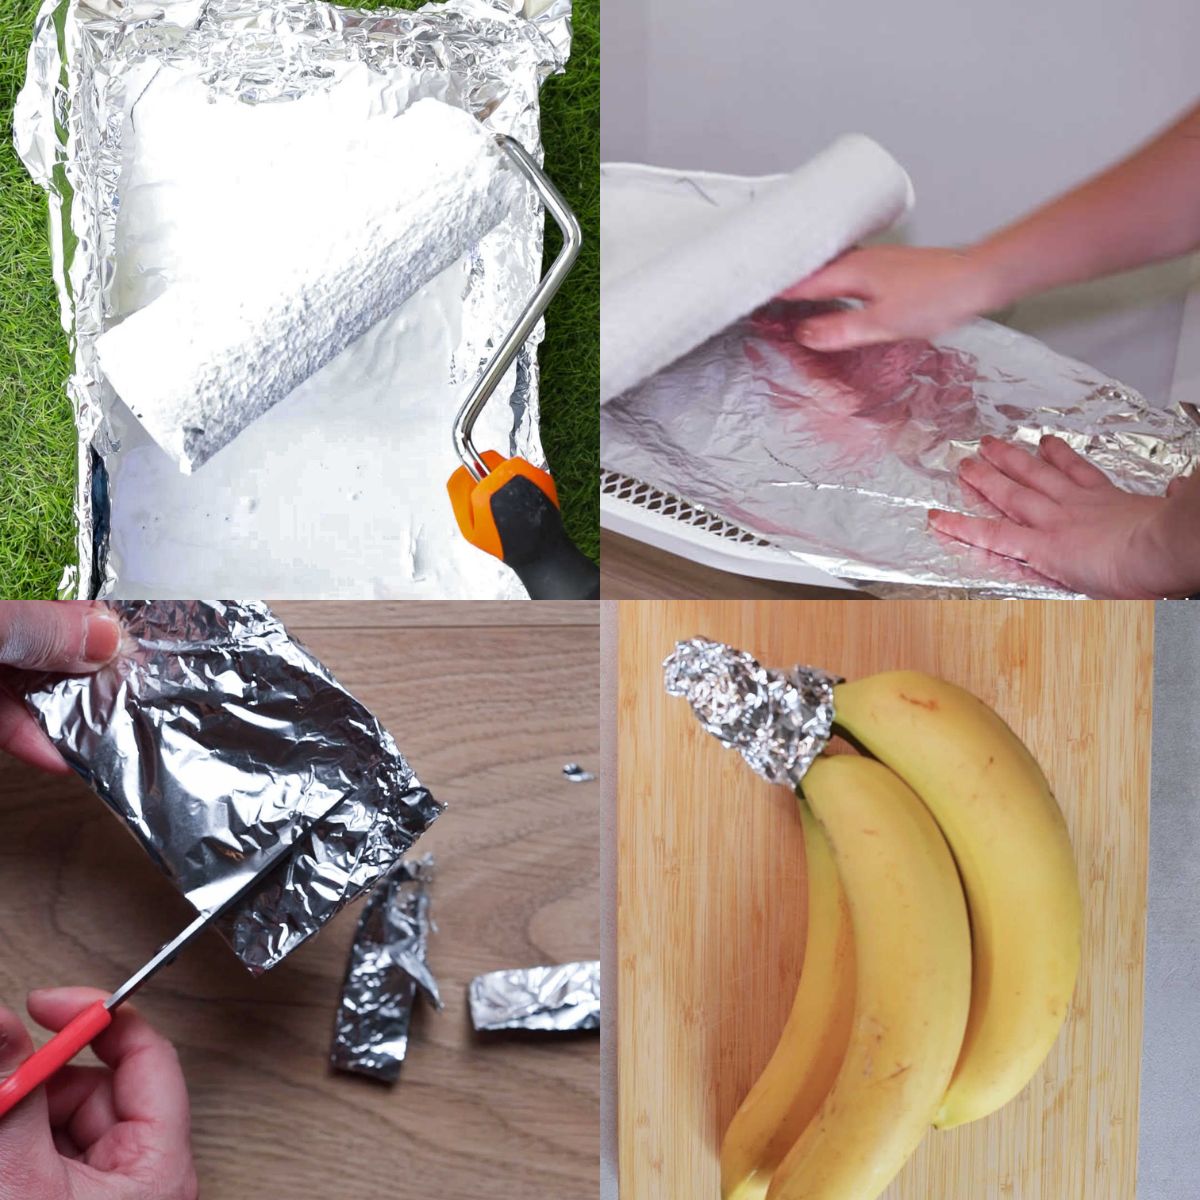 14 So-Helpful Aluminum Foil Hacks from a Midwestern Mom